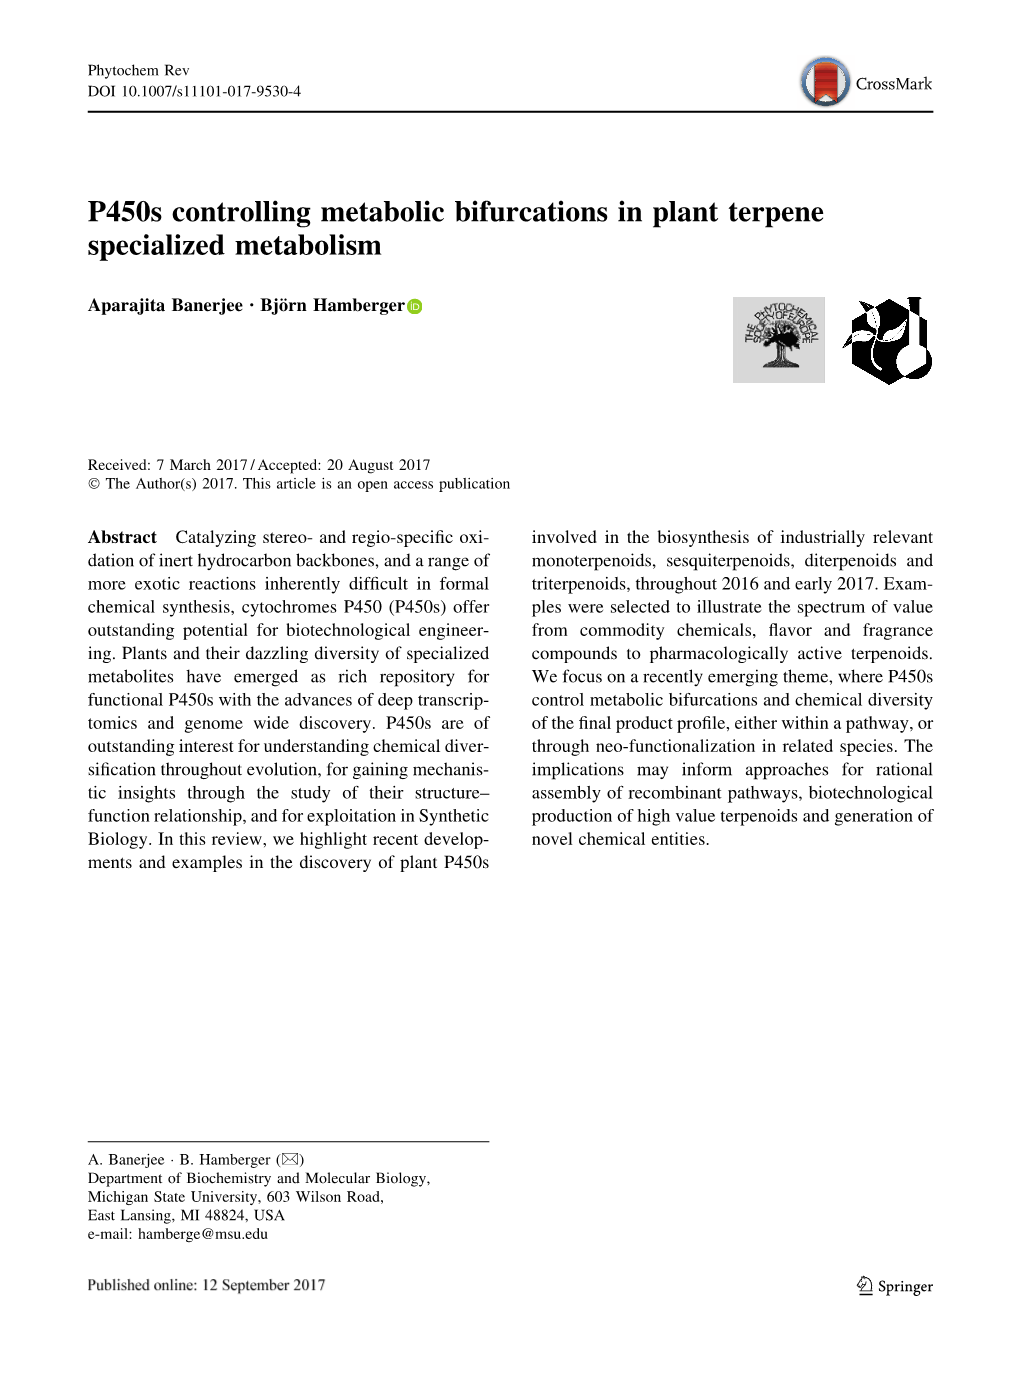 P450s Controlling Metabolic Bifurcations in Plant Terpene Specialized Metabolism